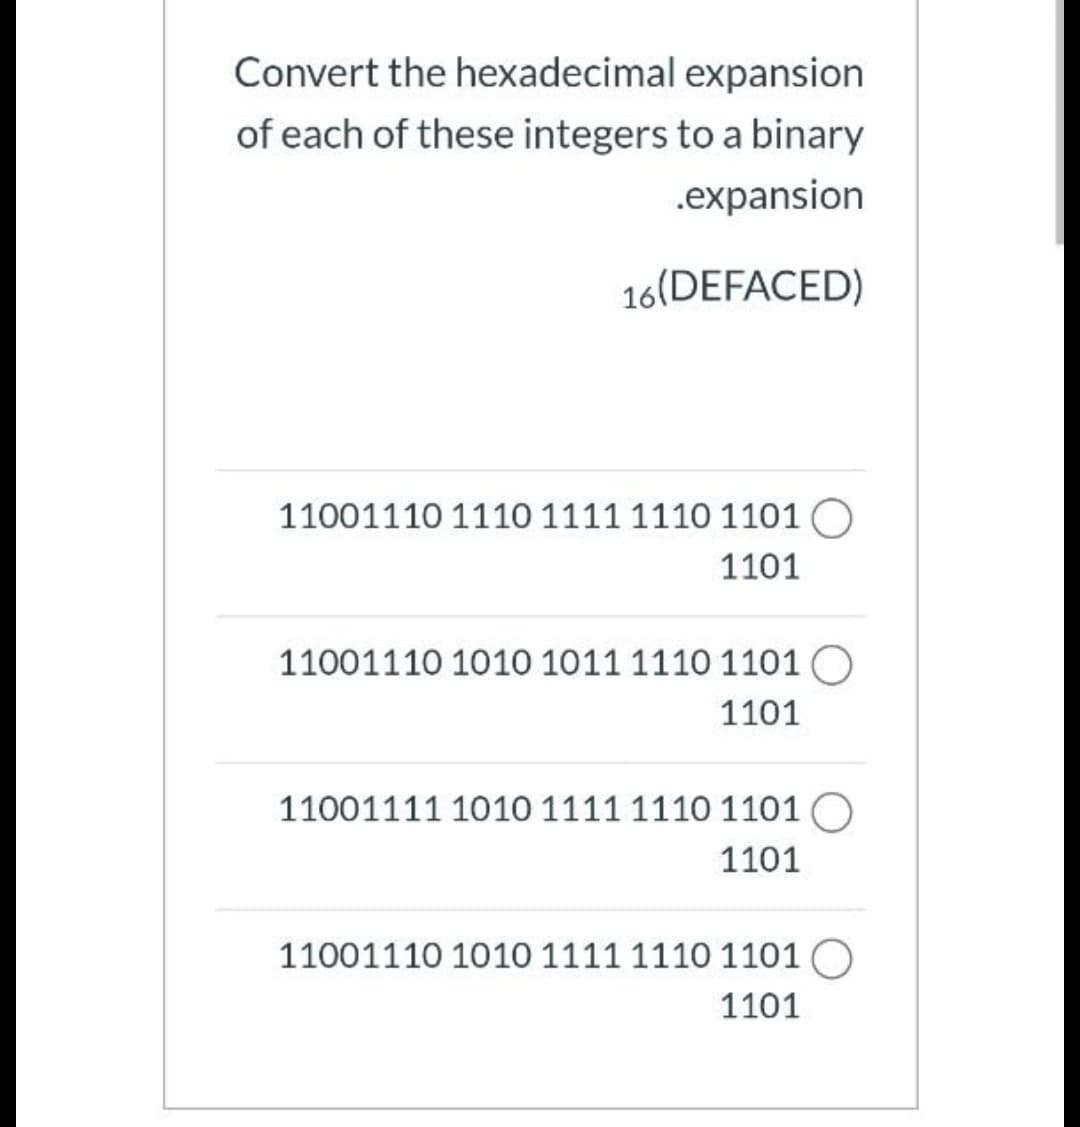 Convert the hexadecimal expansion
of each of these integers to a binary
.expansion
16(DEFACED)
11001110 1110 1111 1110 1101 O
1101
11001110 1010 1011 1110 1101 O
1101
11001111 1010 1111 1110 1101 O
1101
11001110 1010 1111 1110 1101 O
1101
